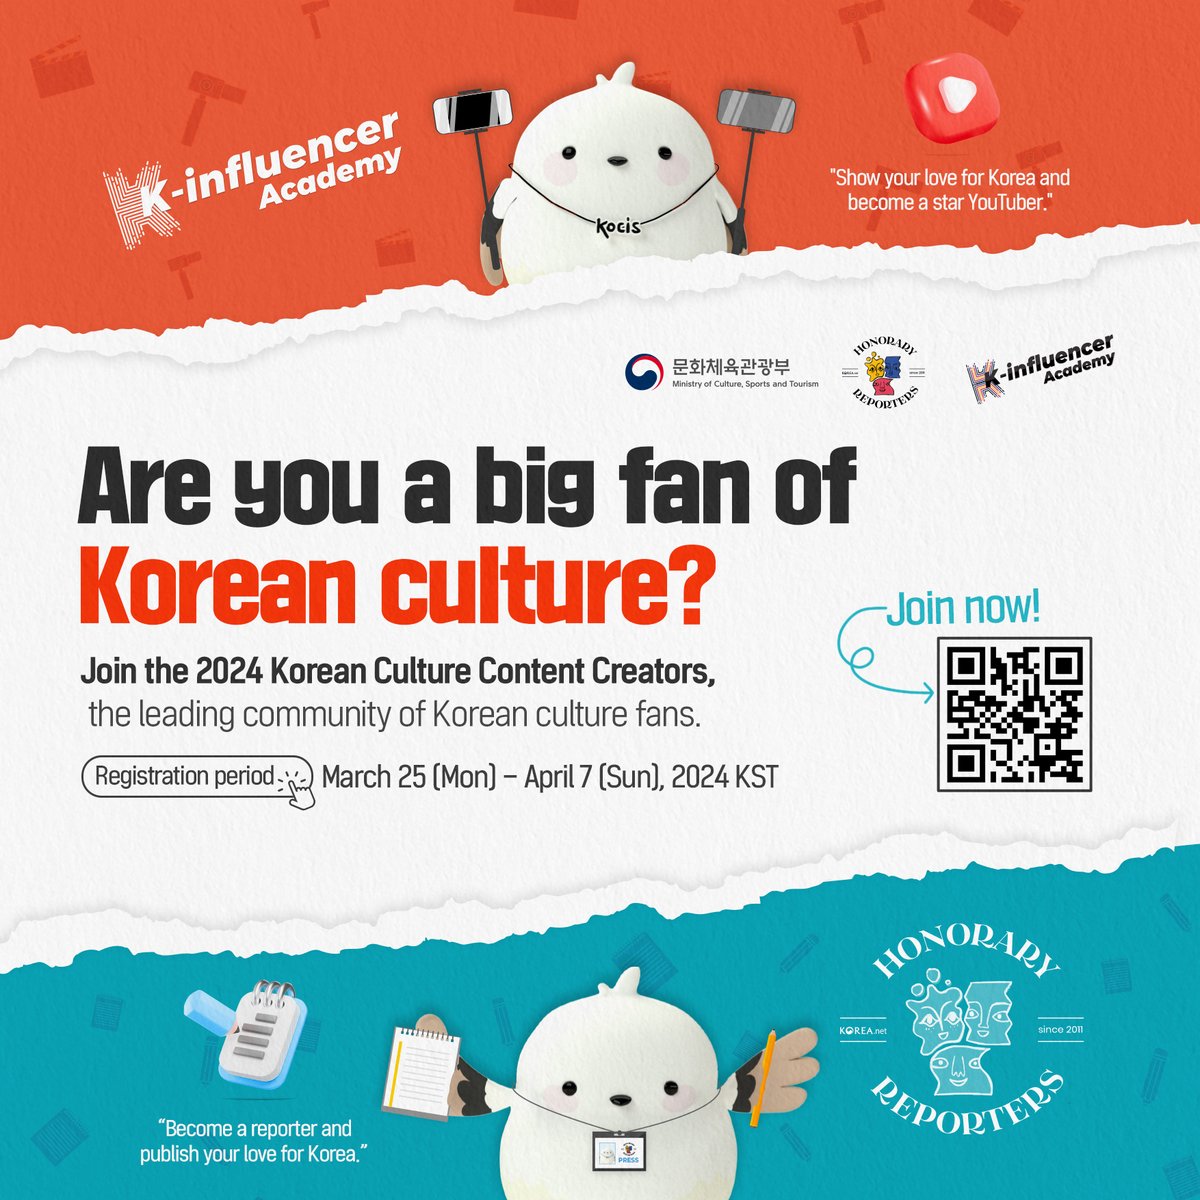 The Ministry of Culture, Sports, and Tourism is accepting applications for its 2024 Korea.net Honorary Reporters and K-influencers! To Apply:2024kcreators.com